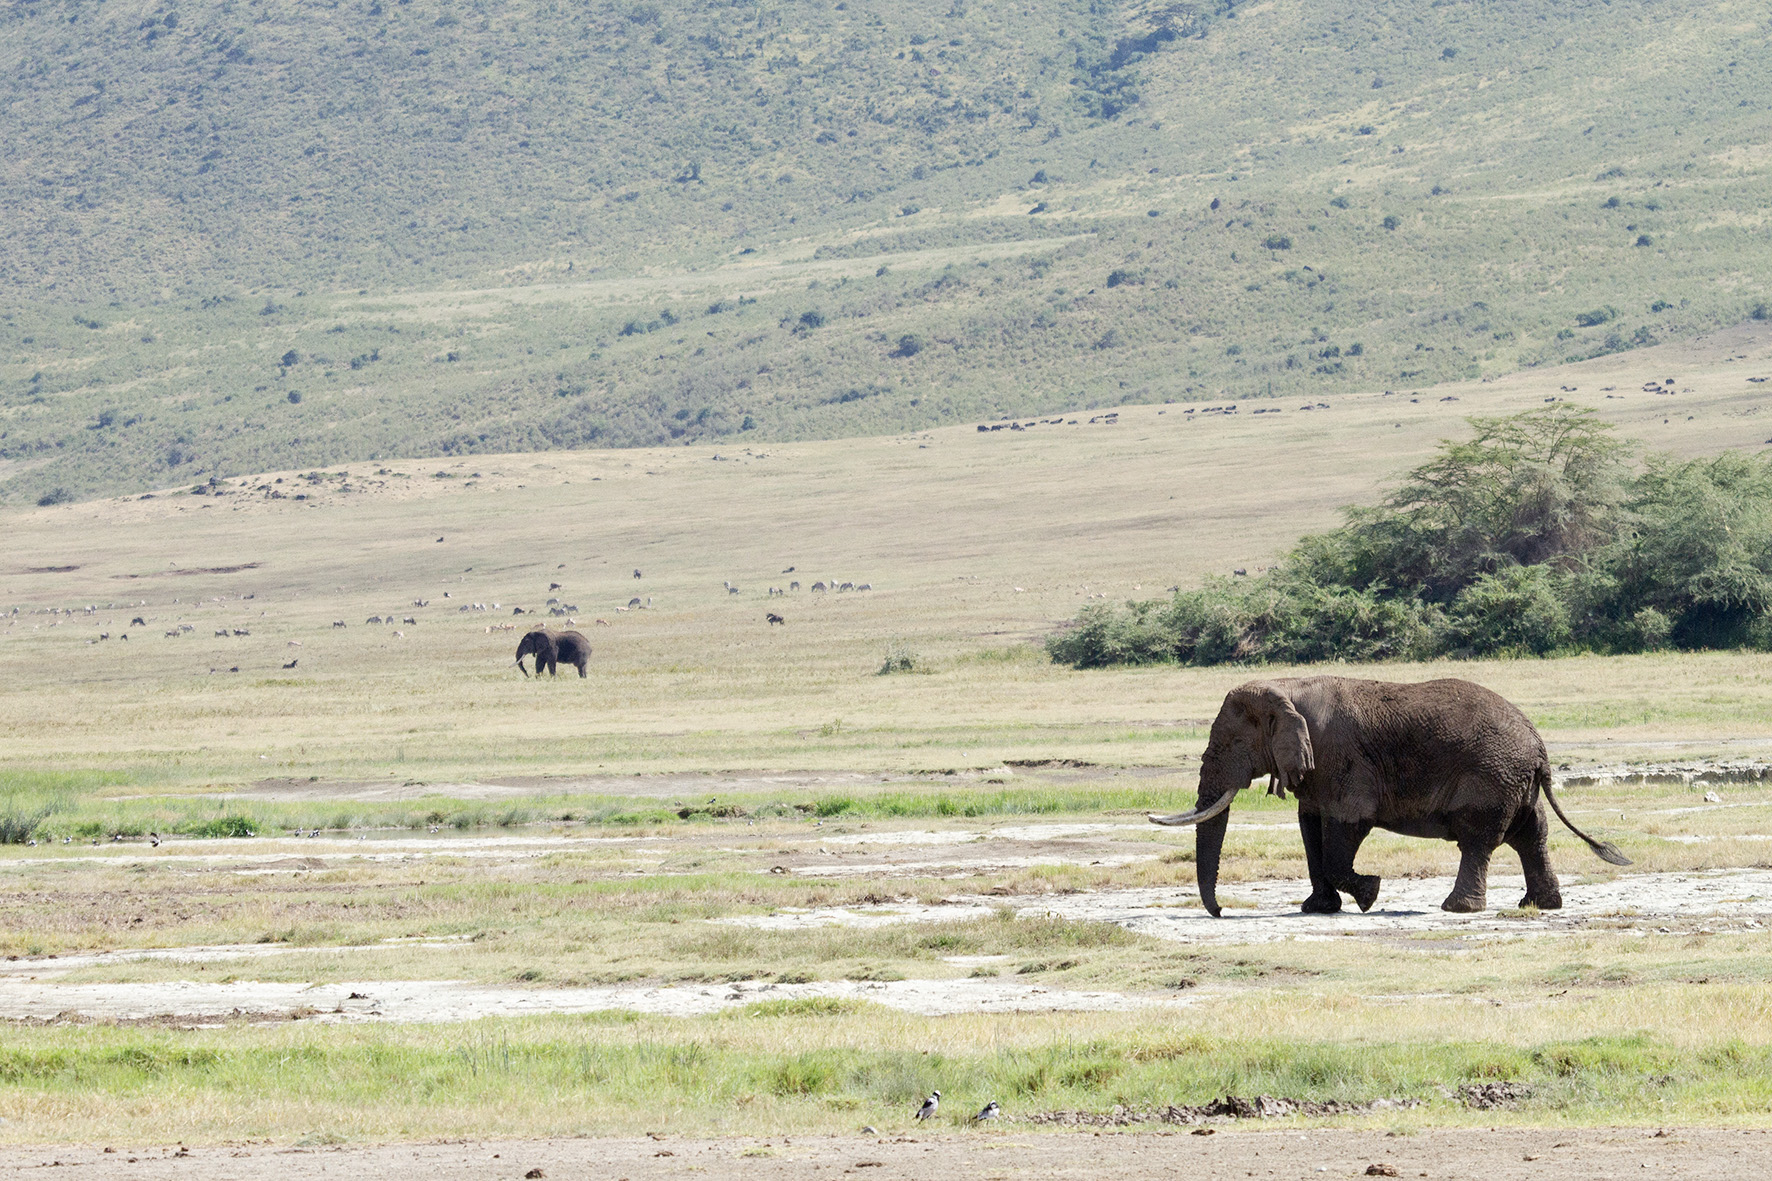 A pair of elephants roaming the plains of Ngorongoro Crater